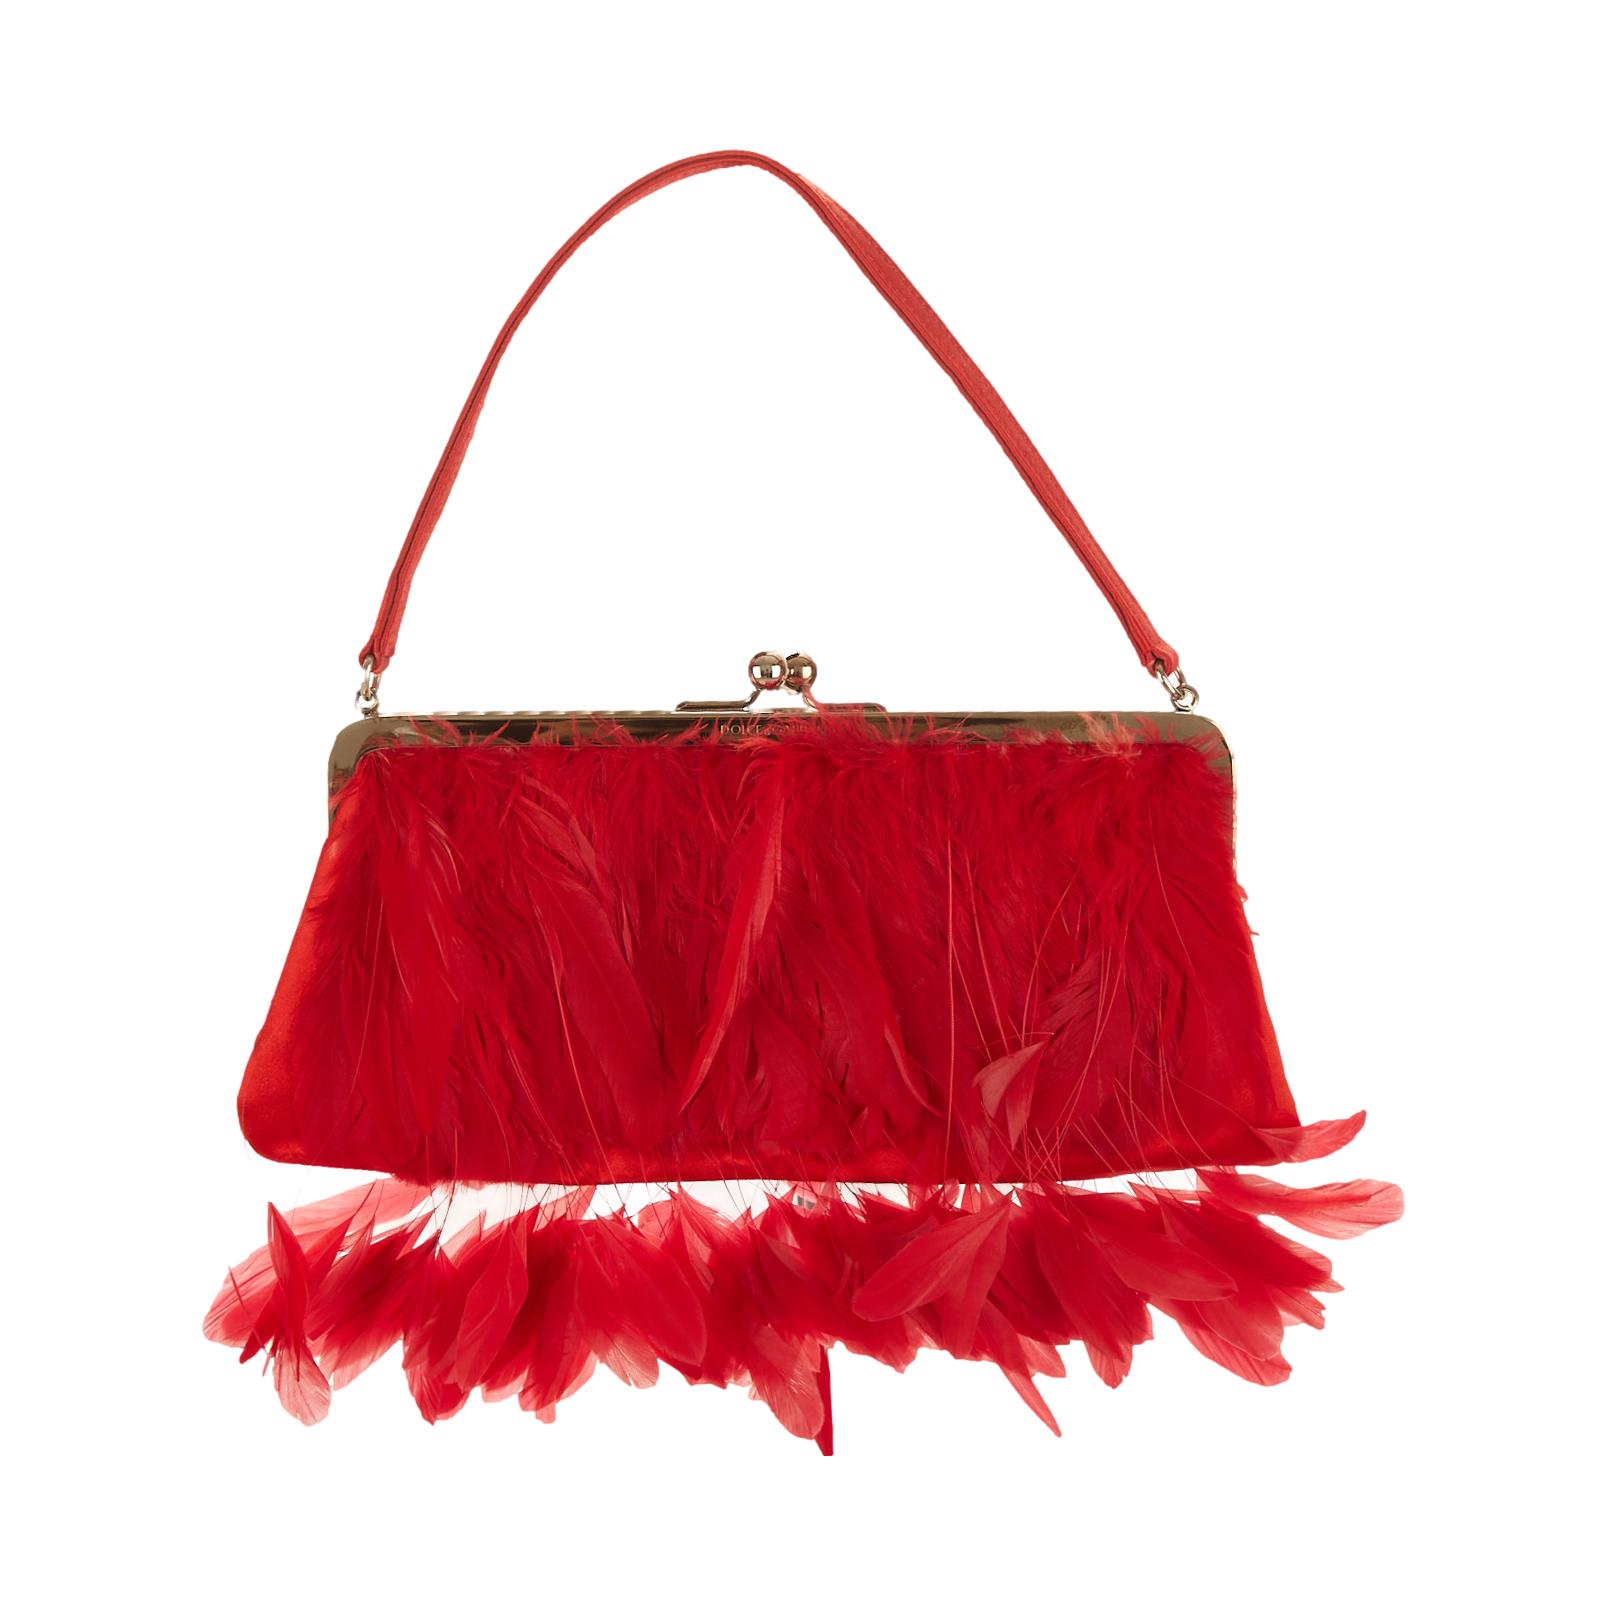 Dolce & Gabbana Red Feather Bag